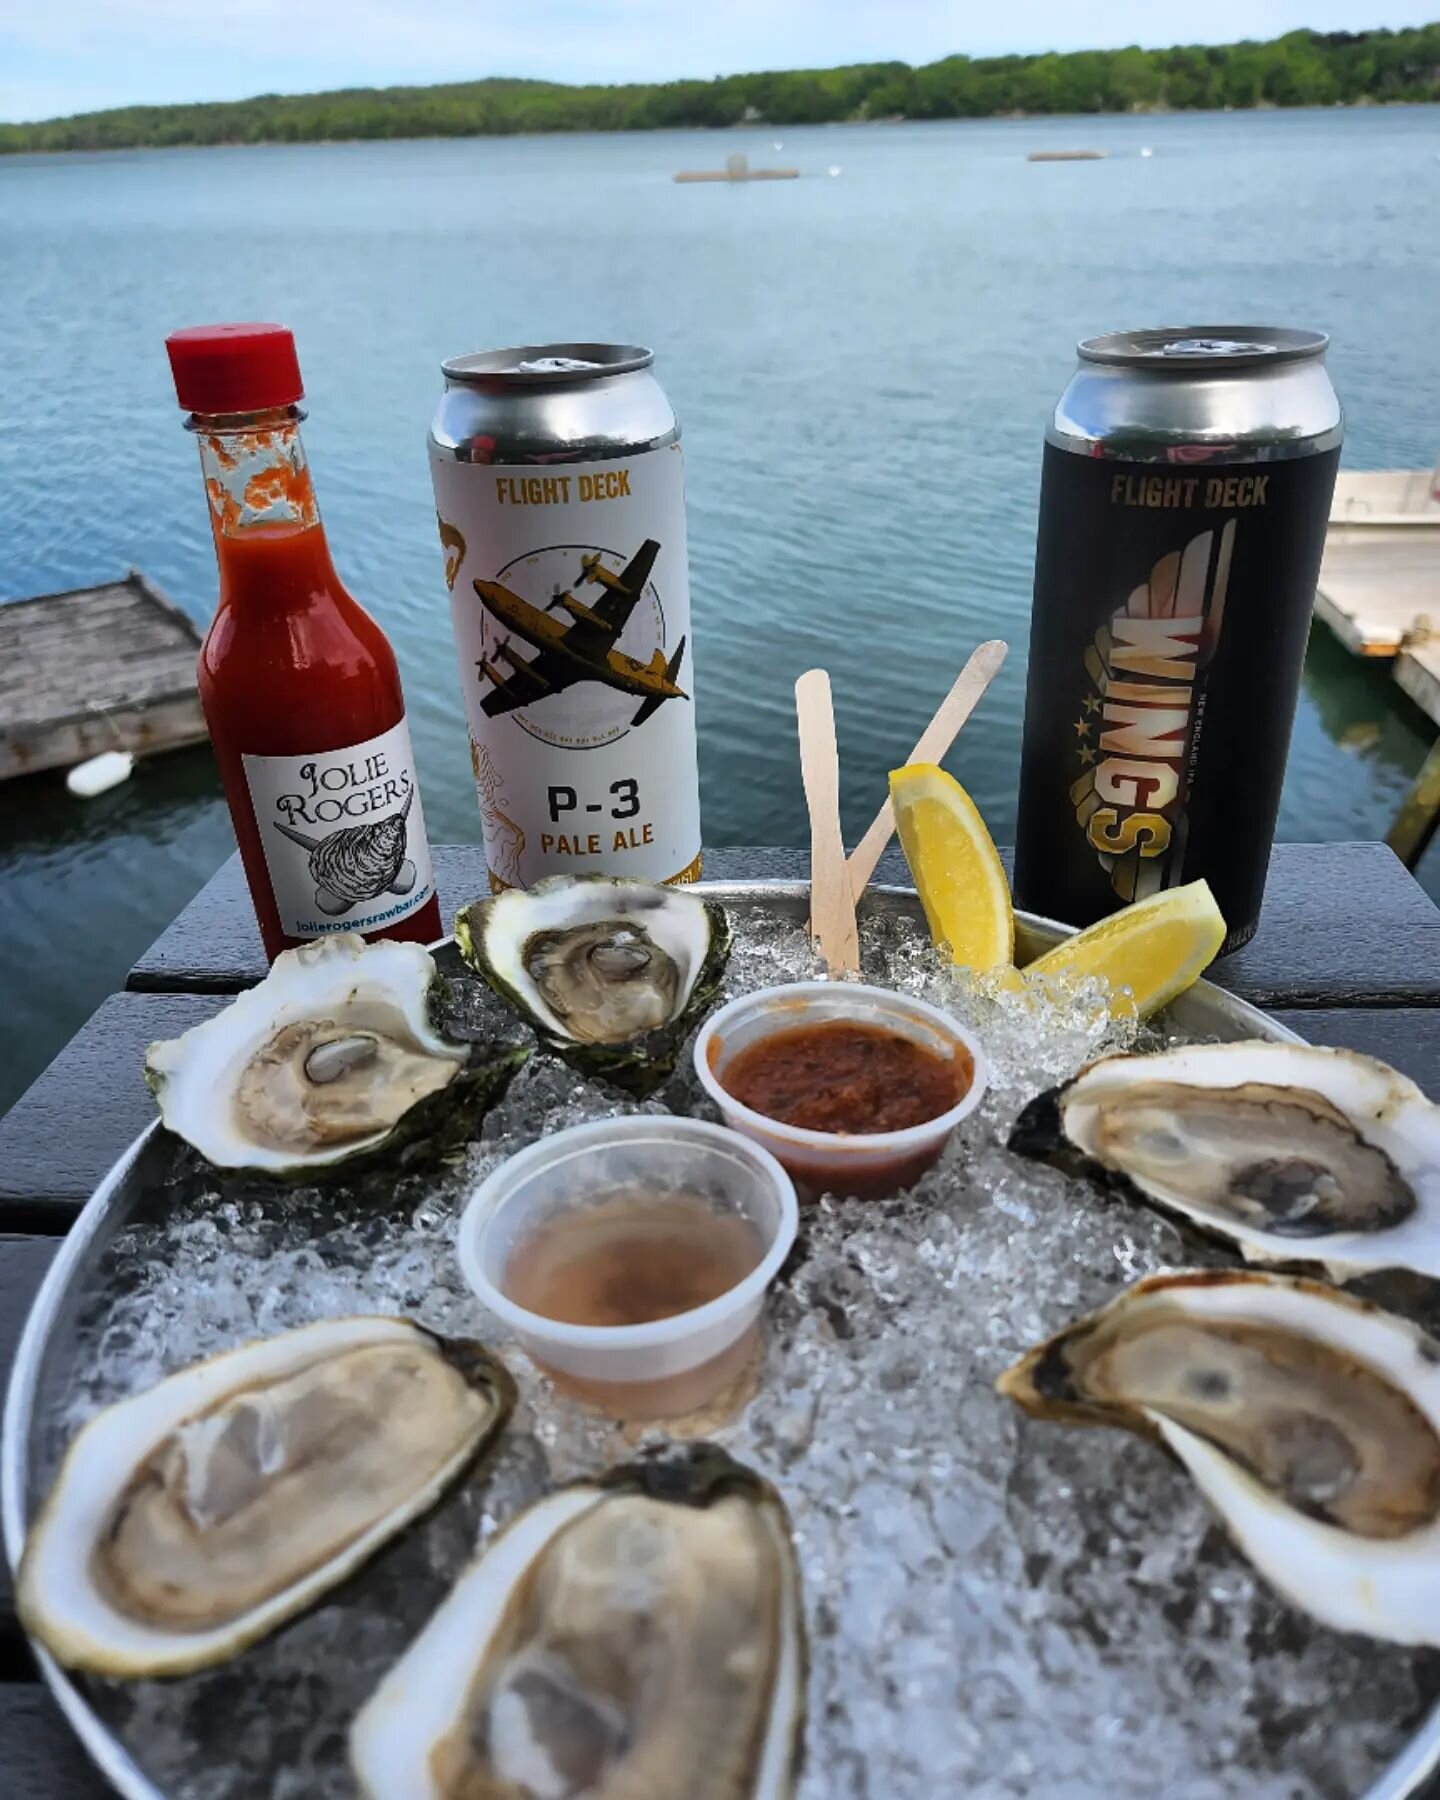 We will be shucking some wicked fresh oysters @flightdeckbrewingco tomorrow Friday 6/3 from 3pm - 8pm!